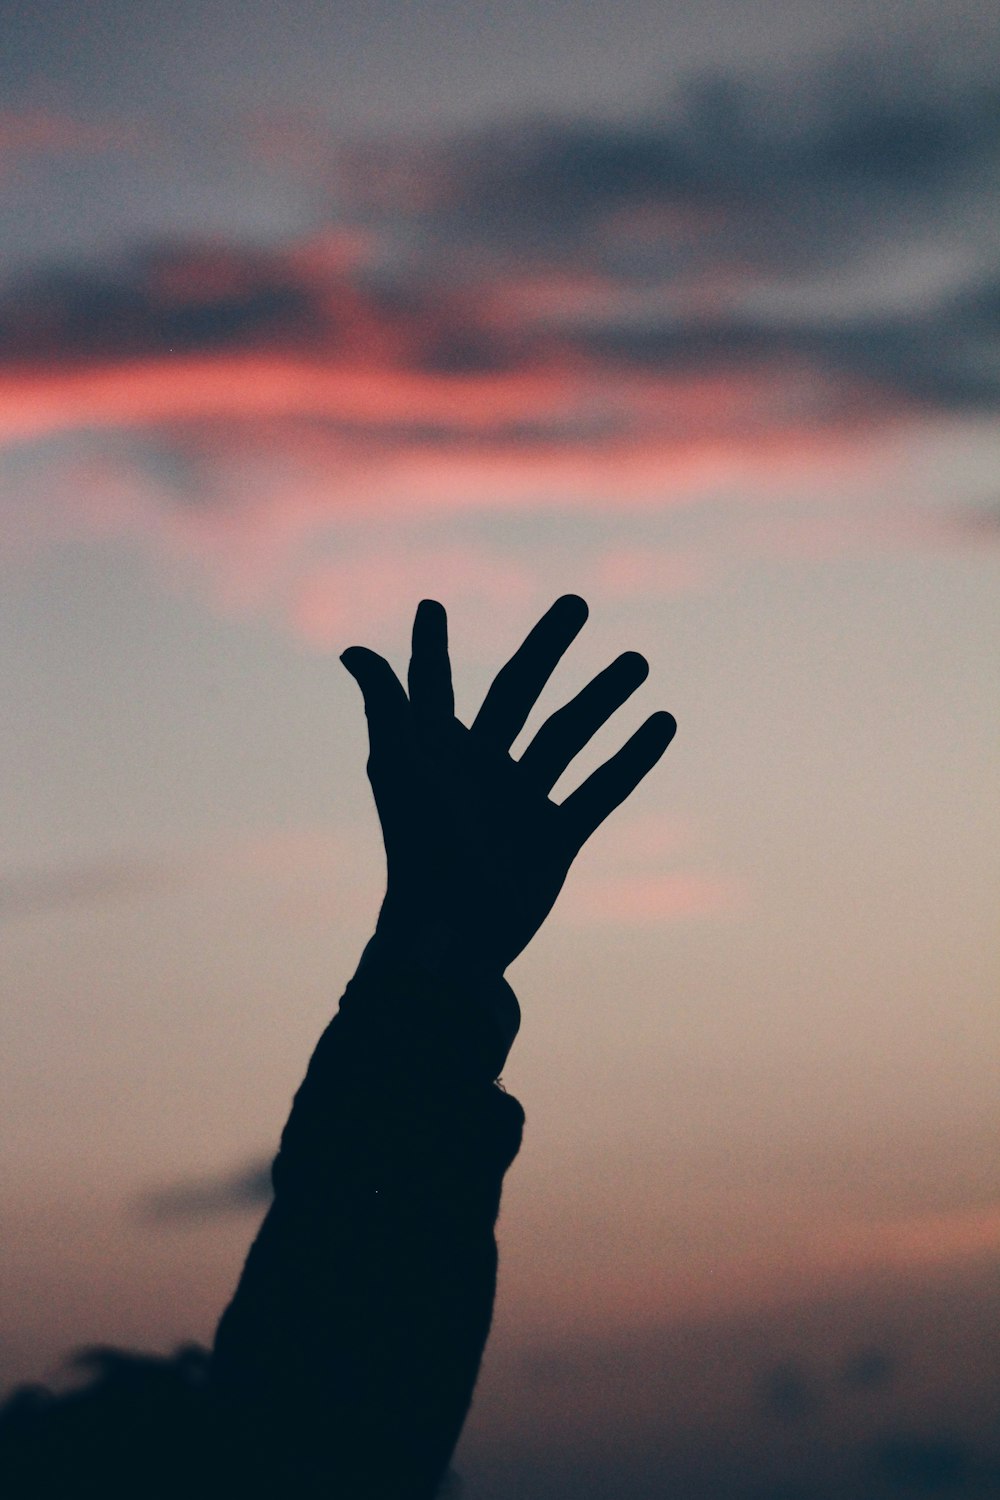 silhouette of person's hand during golden hour